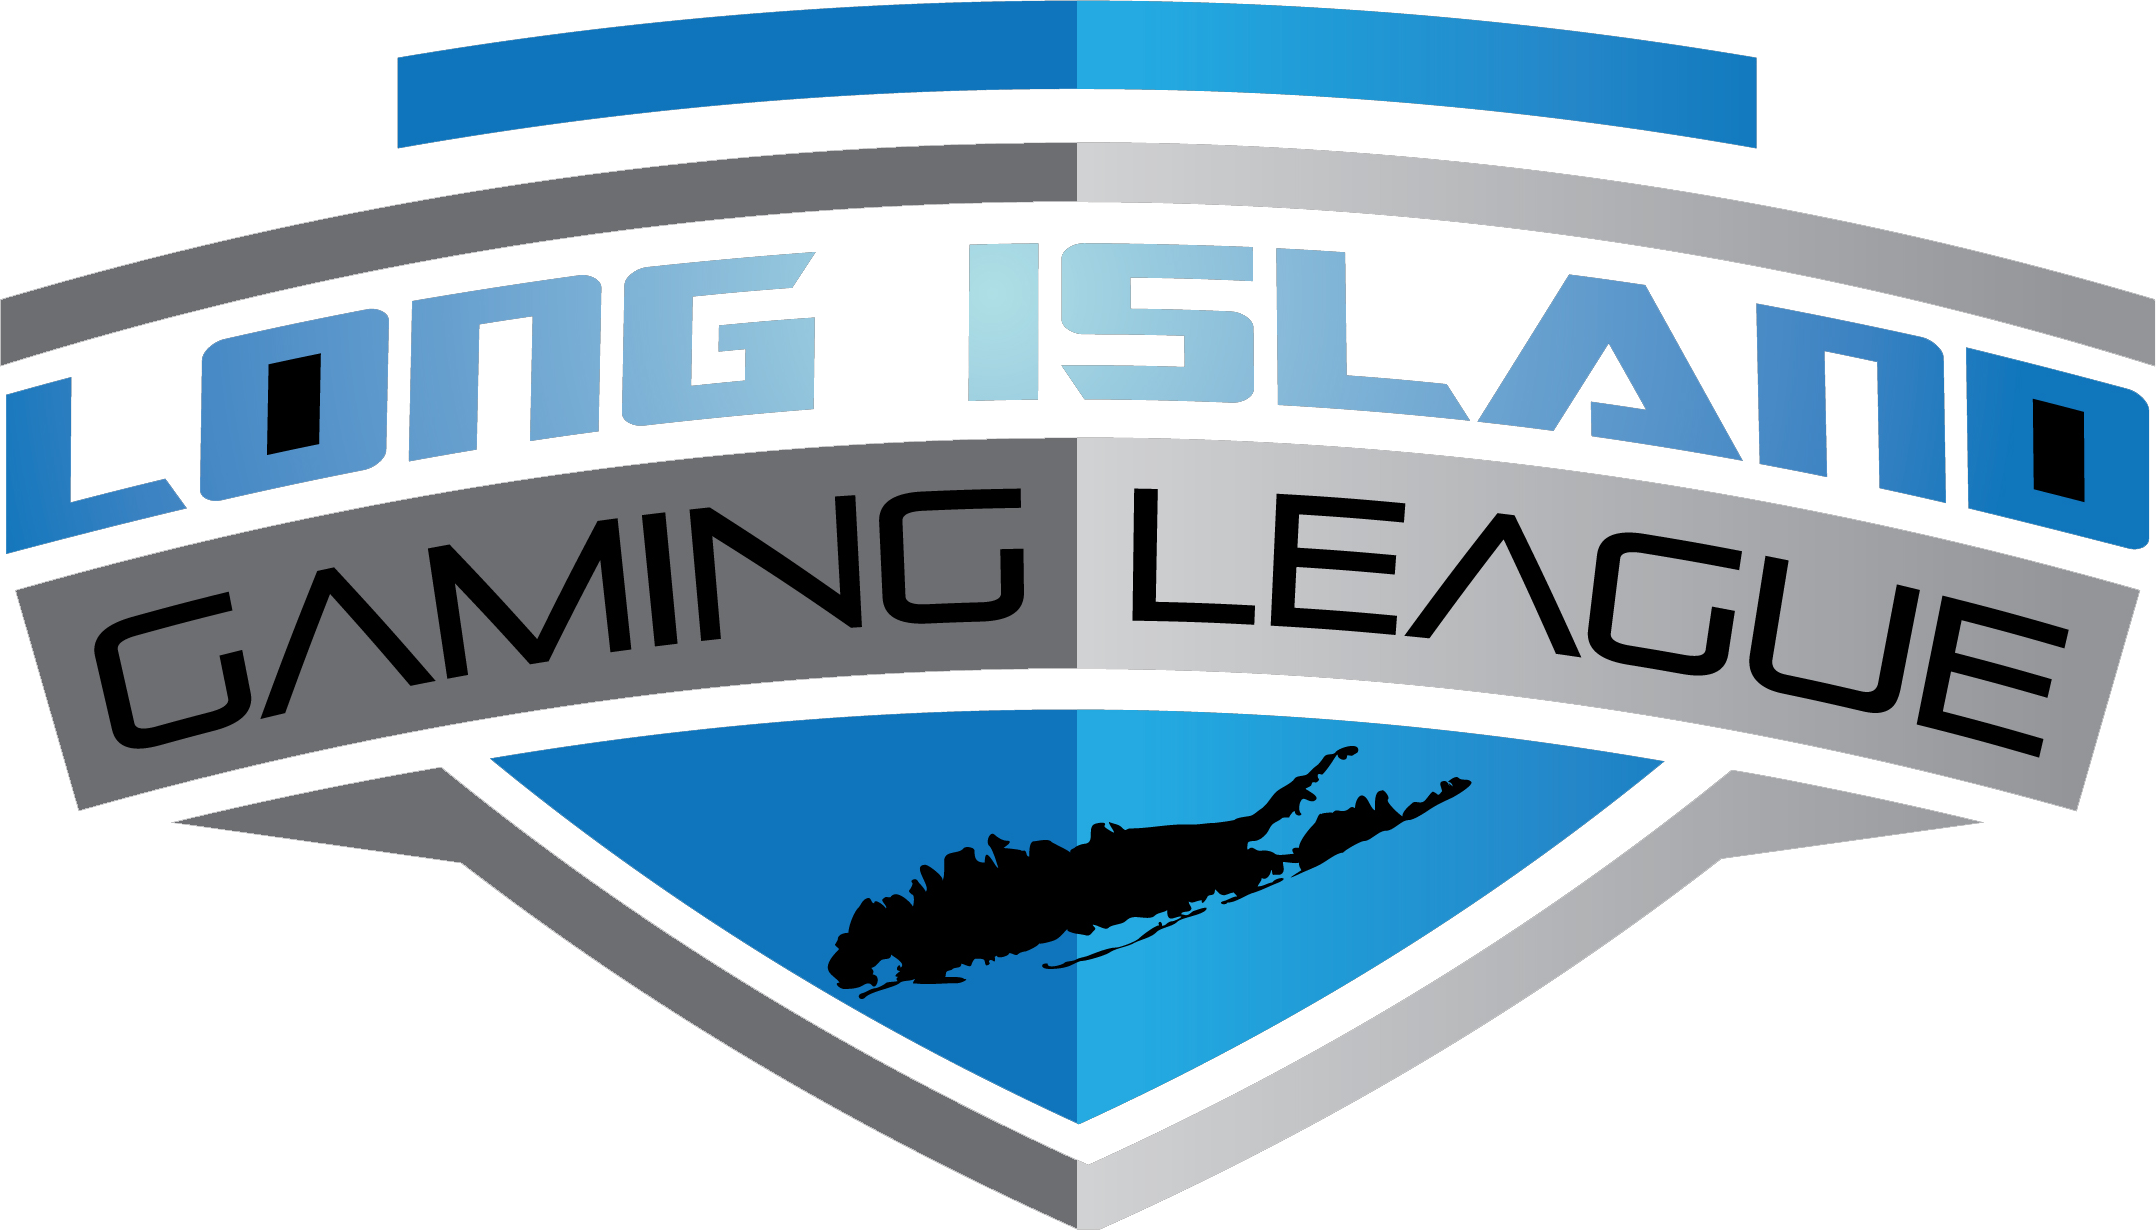 Long Island's Casual & Competitive Gaming league we put the "E" in Esports